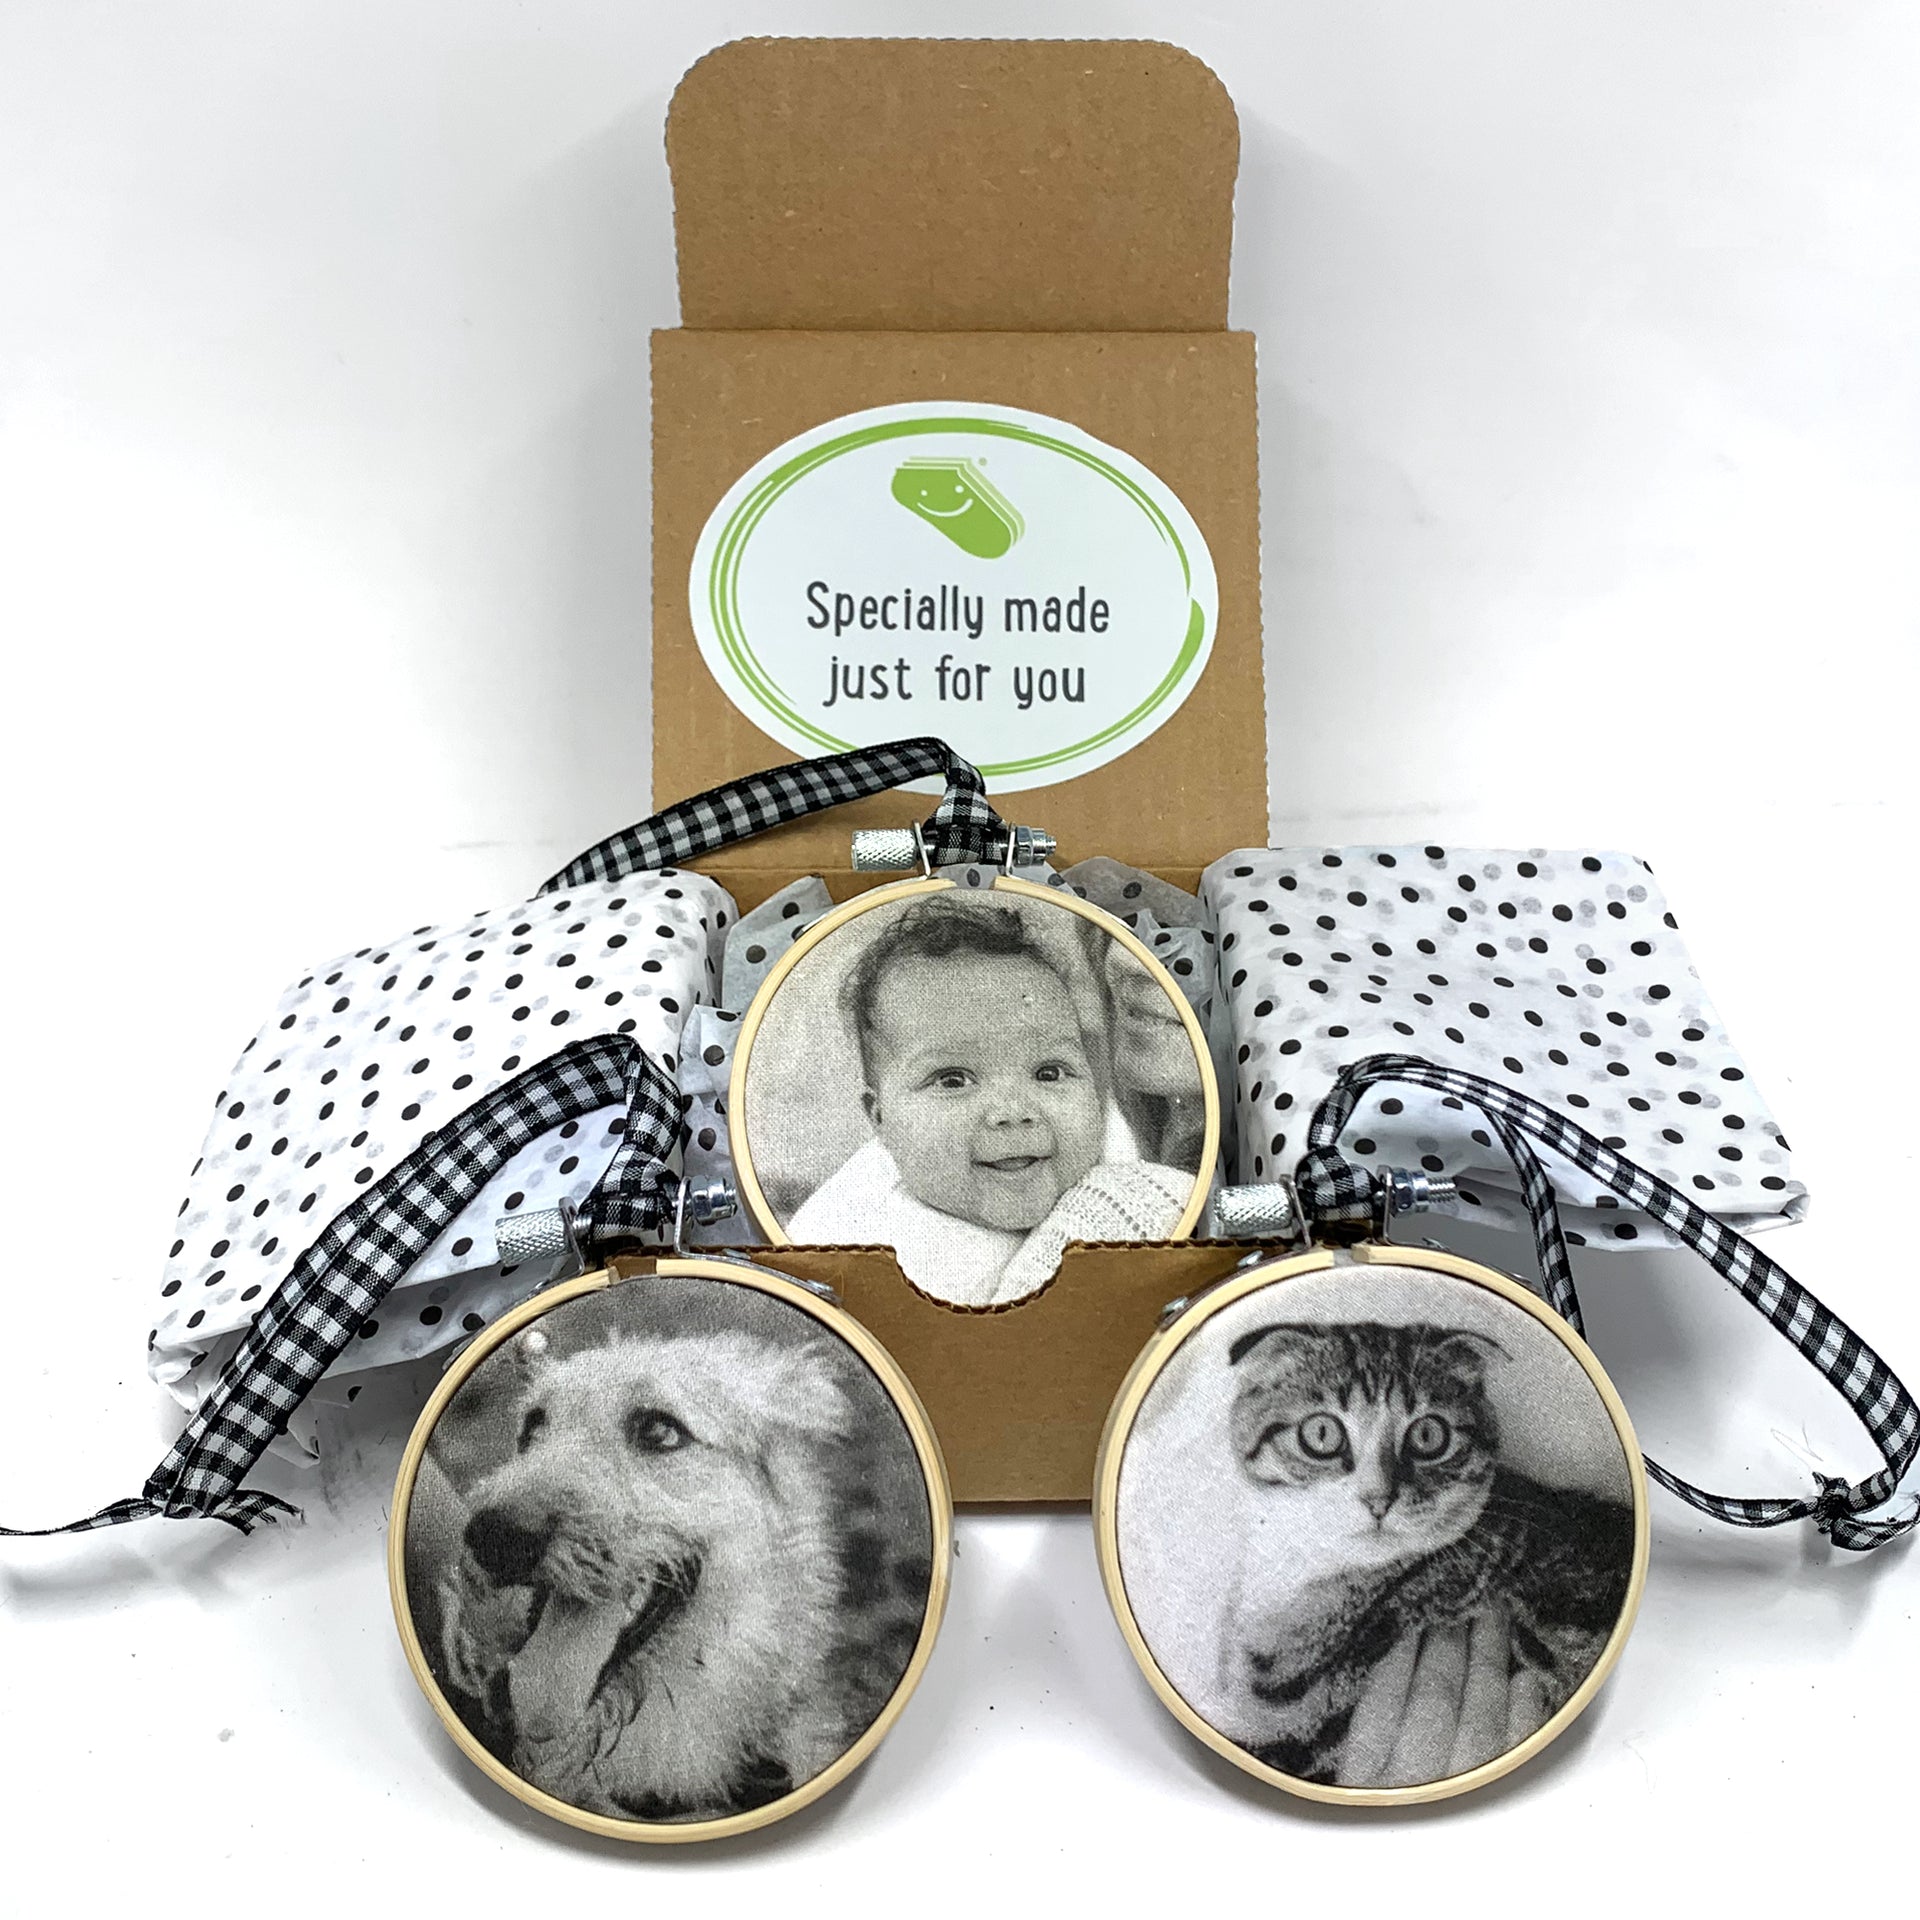 Custom personalized photo ornaments with your photos in a gift box ready to gift for the holidays.